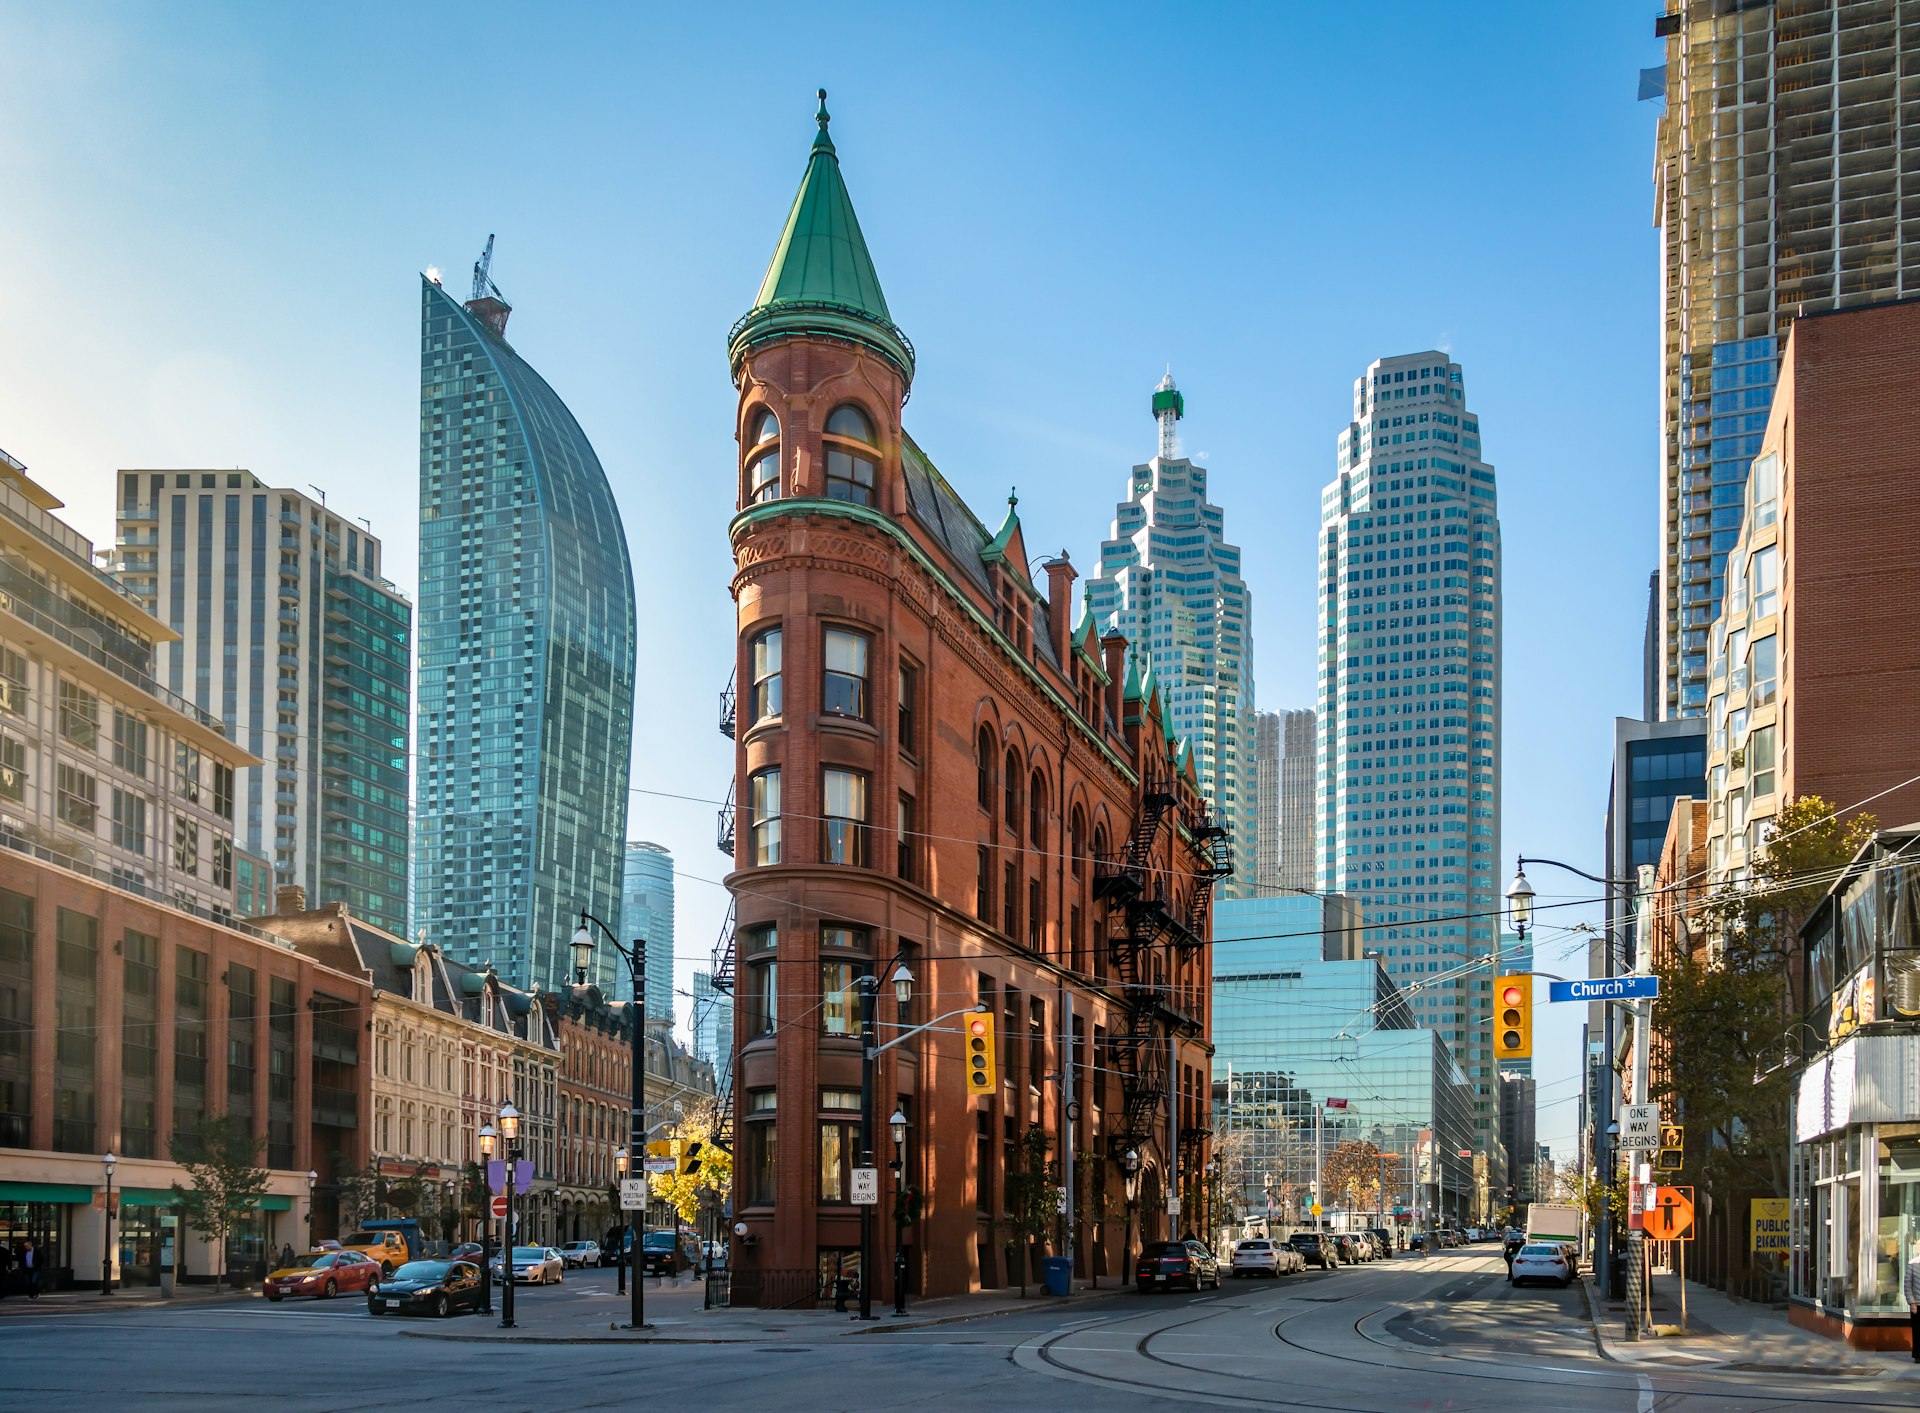 Exterior of the Gooderham or Flatiron Building in downtown Toronto